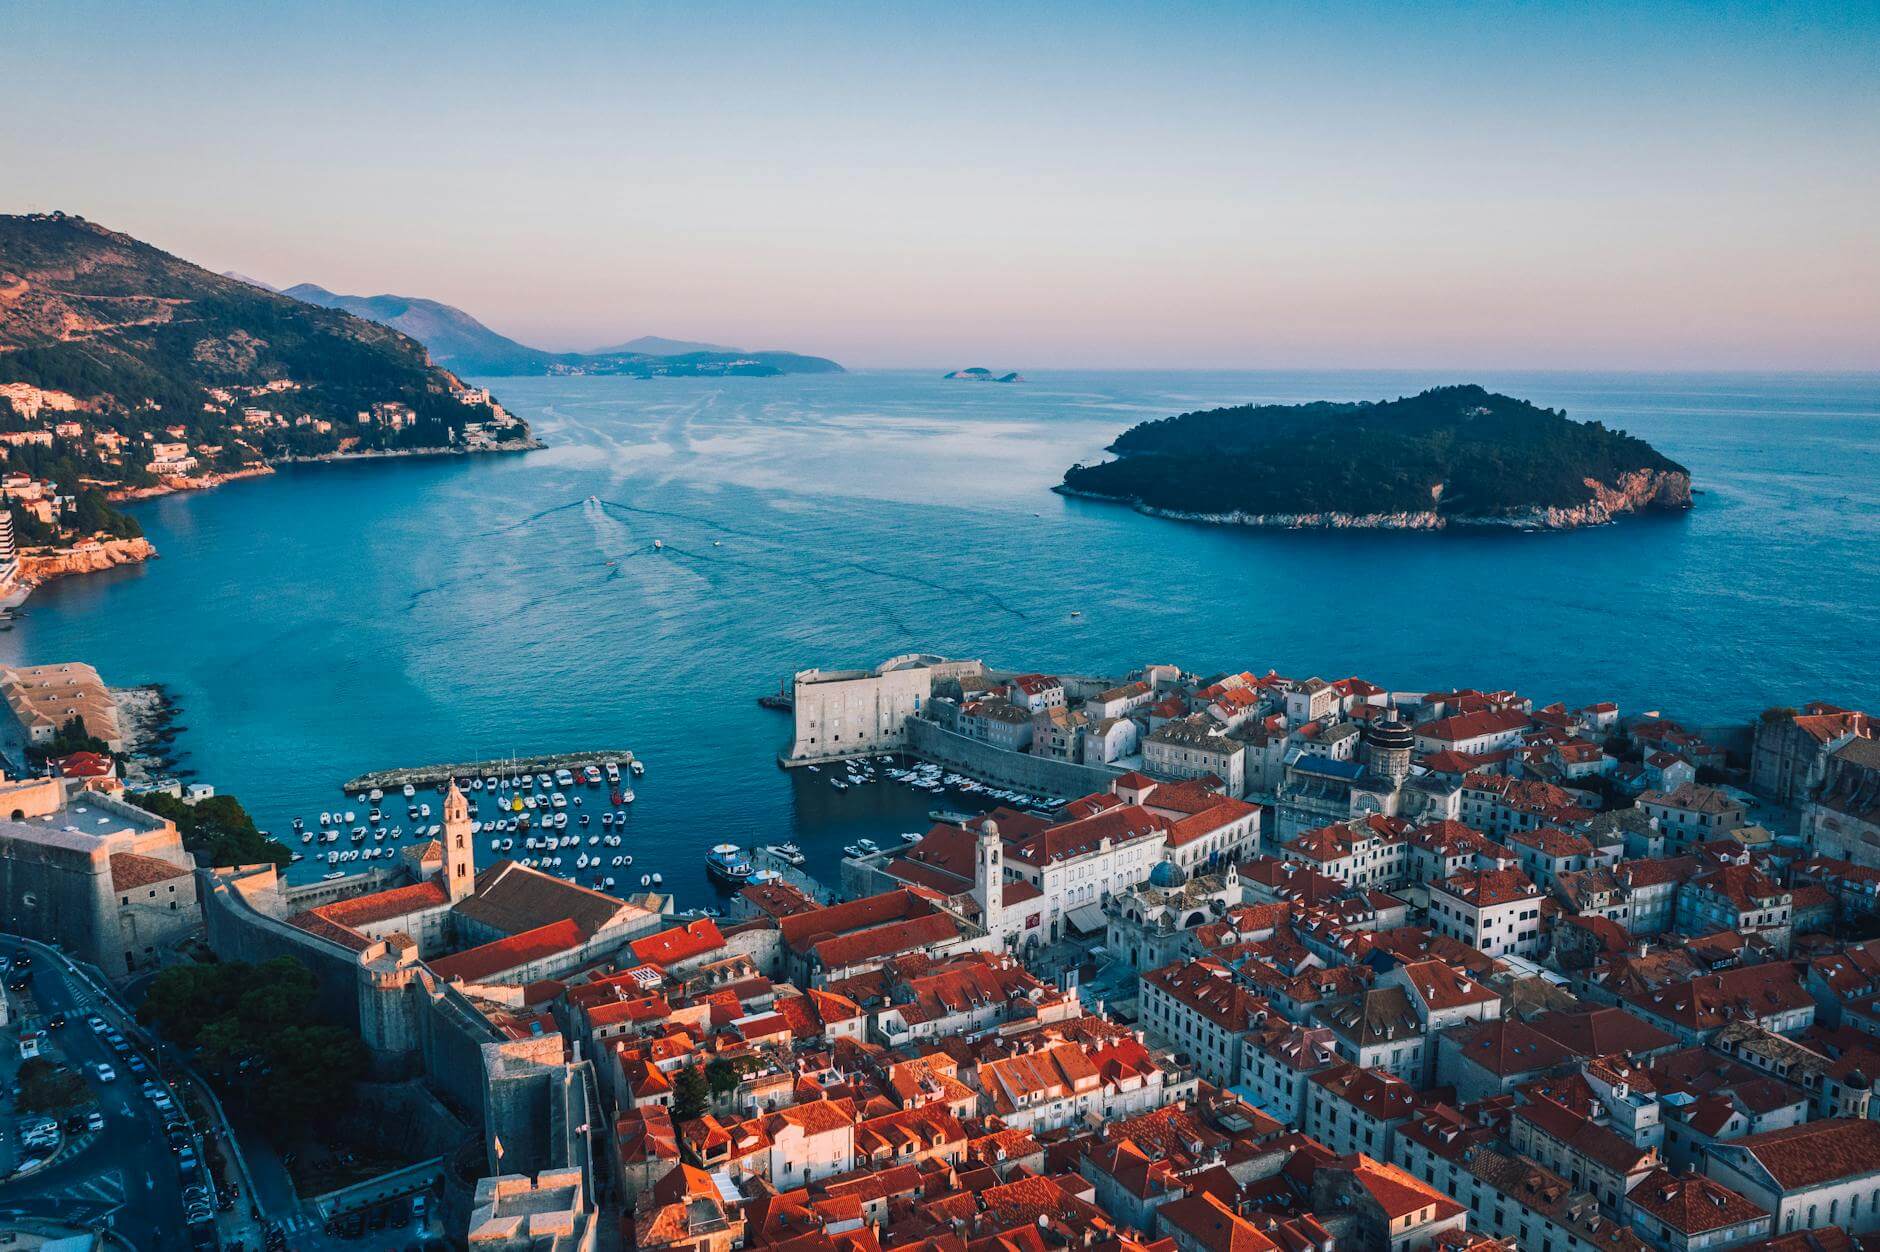 aerial view of a city and island in Croatia as one of the delicious destinations